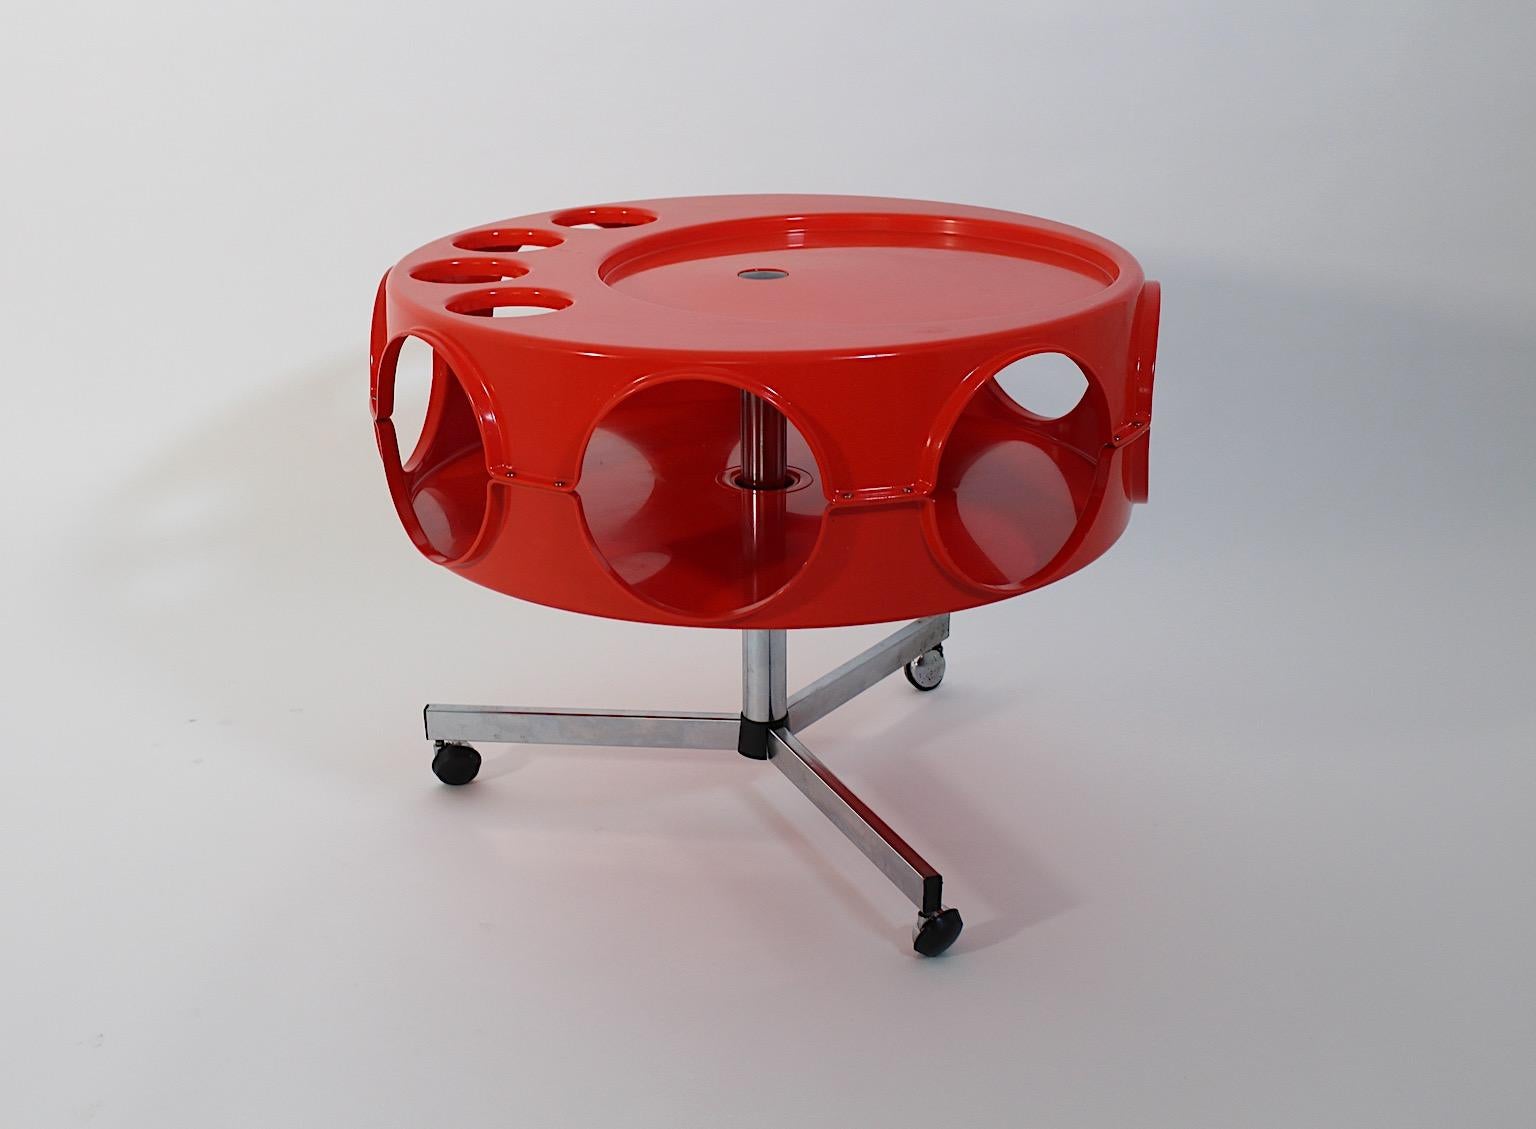 Space Age vintage bar cart or sofa table Rotobar by Curver from plastic in orange color circa 1971, Netherlands.
A bold and joyful new arrival, the wheel supported bar cart with 4 ( four ) inlays for vessels or bottles in a red orange color from